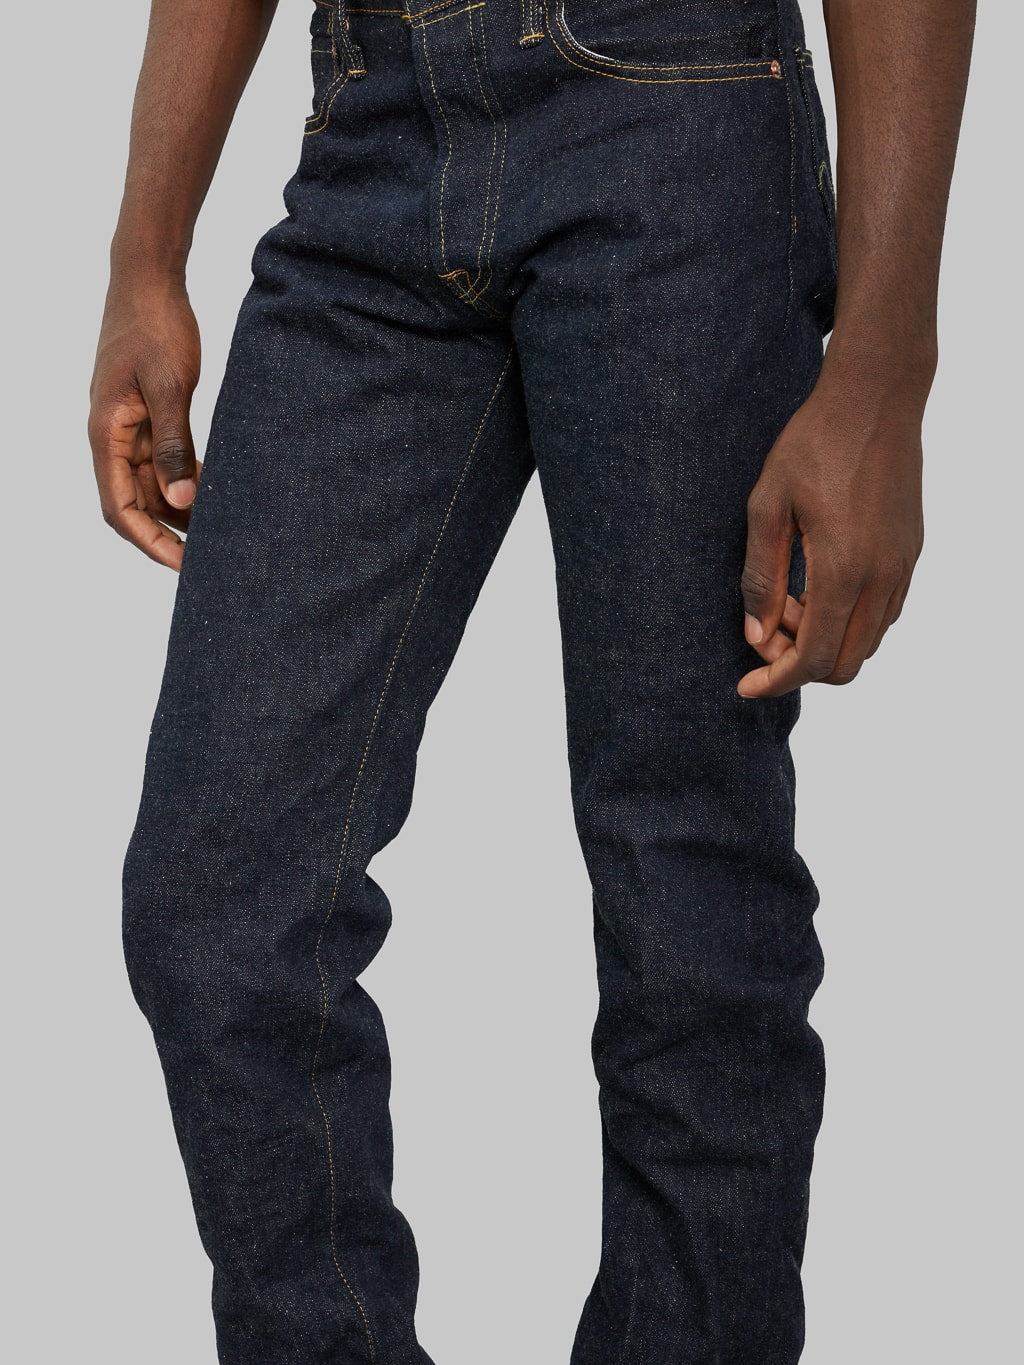 ONI 525 Natural Indigo Rope Dyeing Denim Classic Straight Jeans 100 cotton